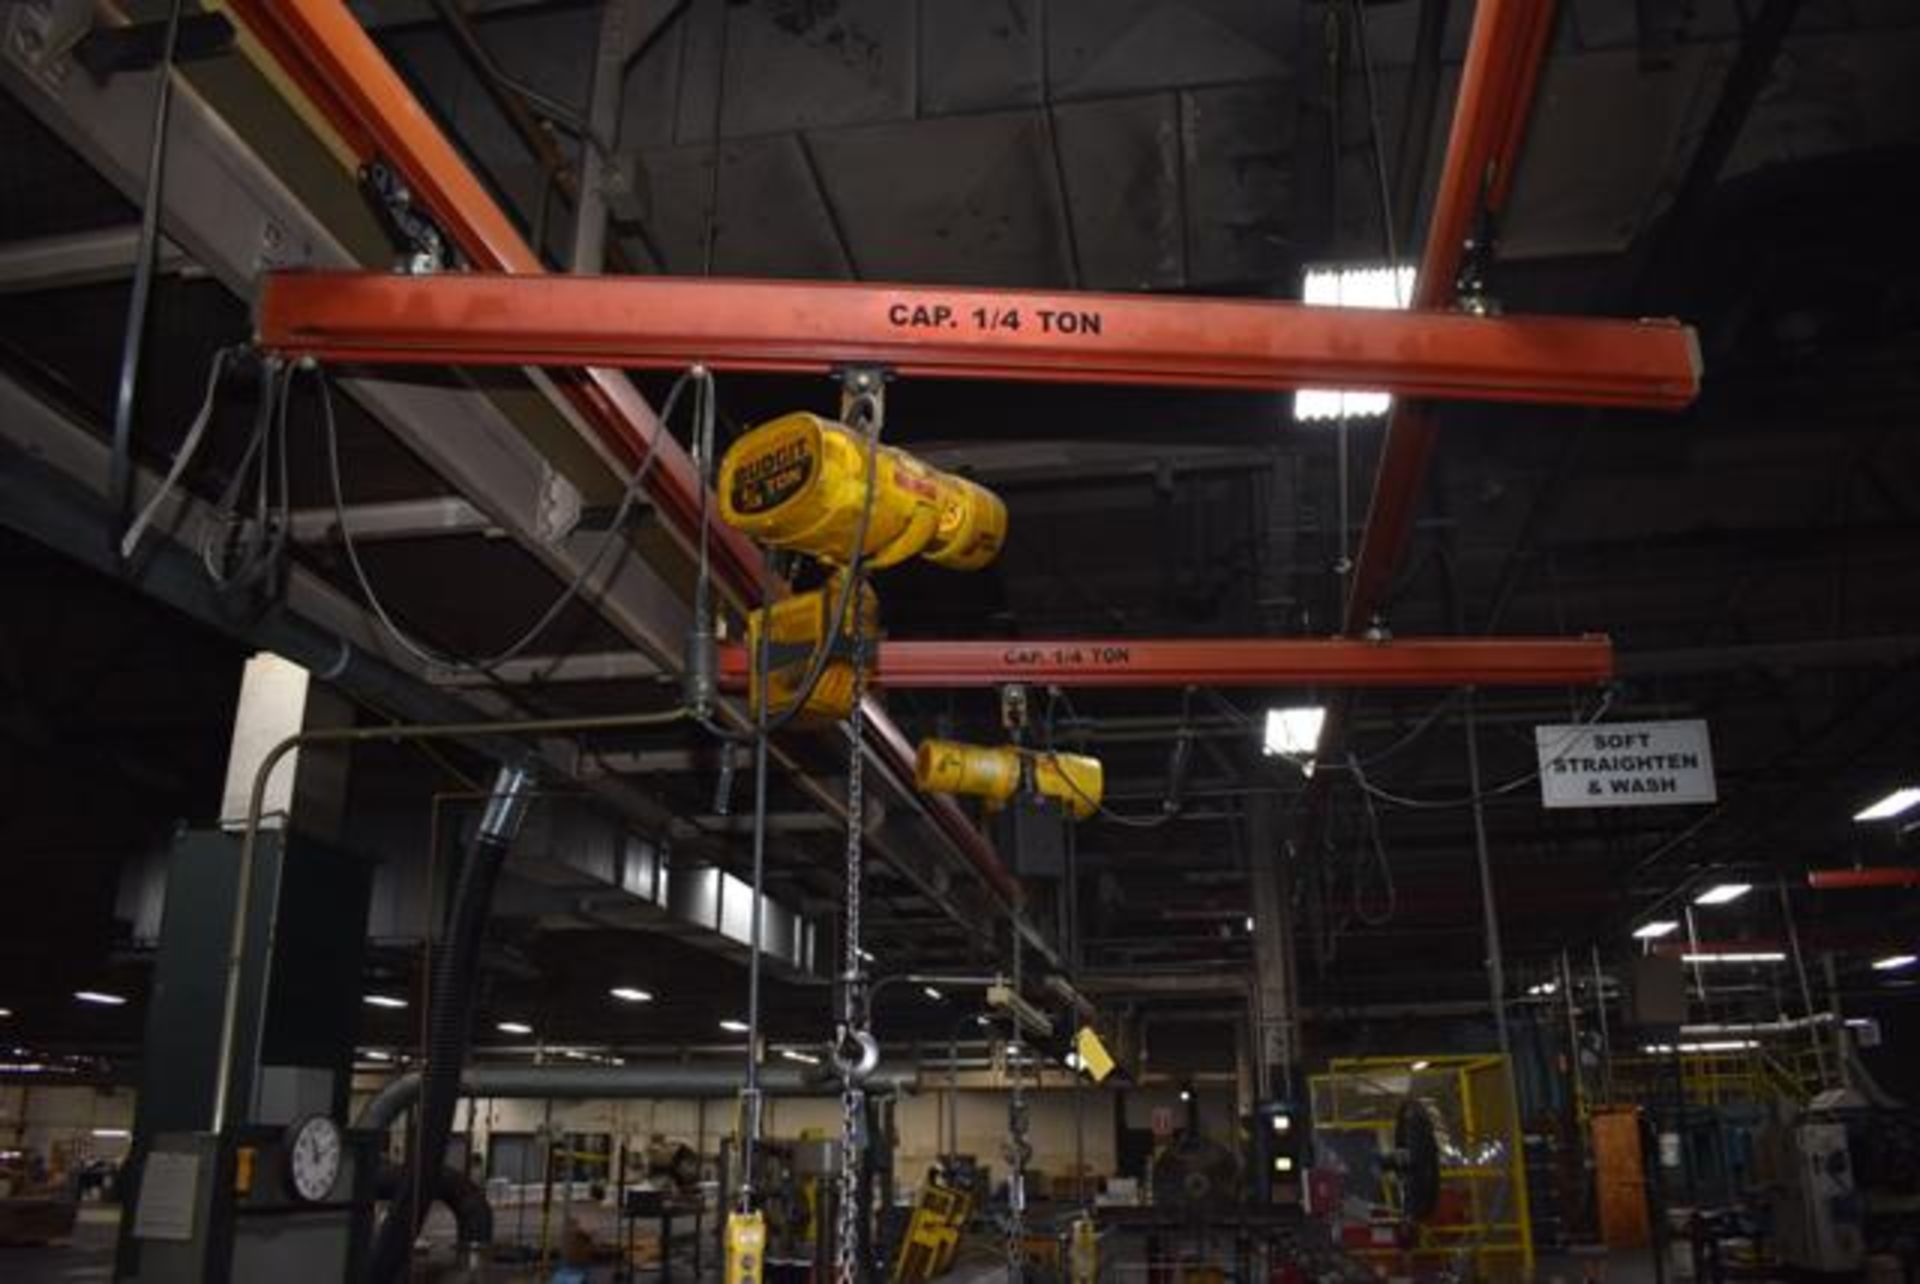 Demag Overhead Crane System Suspended from Ceiling, Approx. 12' Span x 30' Floor Space,2 Masts w/ - Image 2 of 2